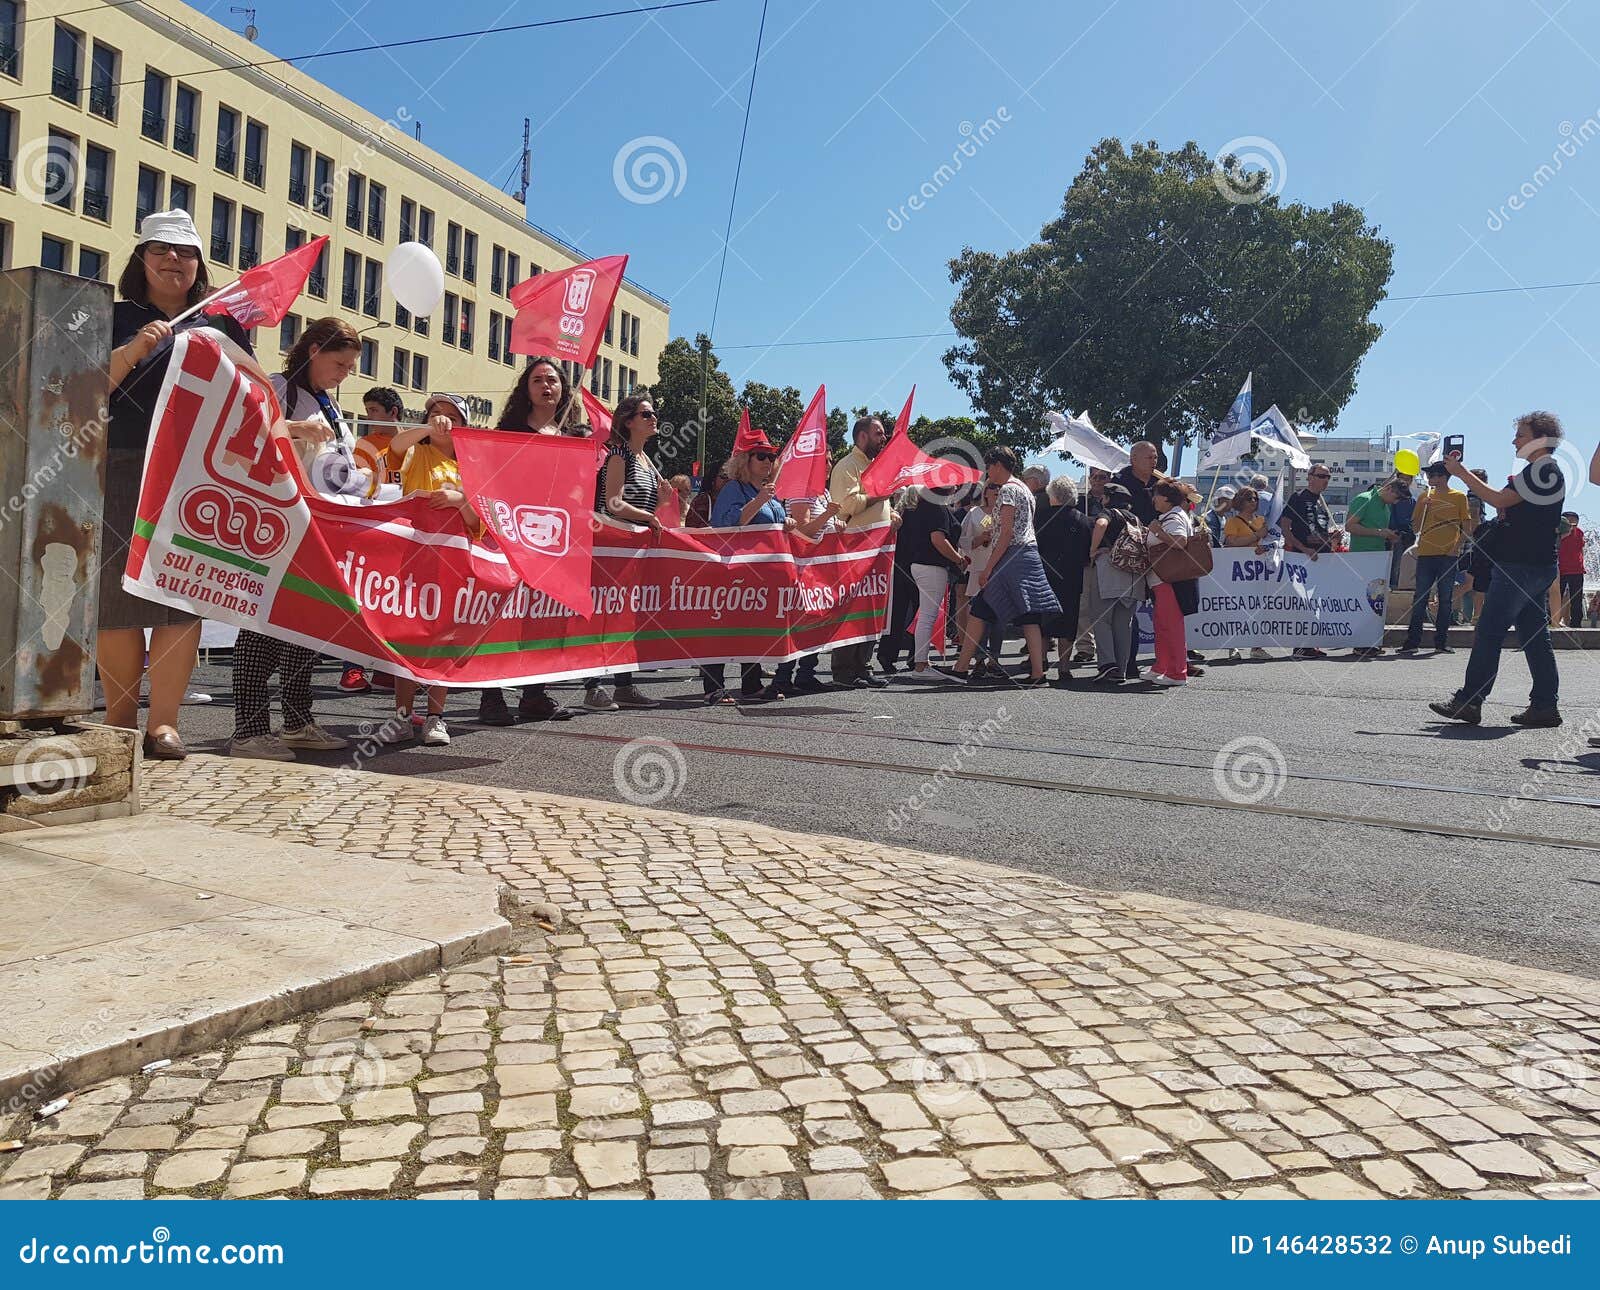 Workers Day Celebration In Praca De Martin Monize Editorial Photography Image Of Crowded Ethnicity